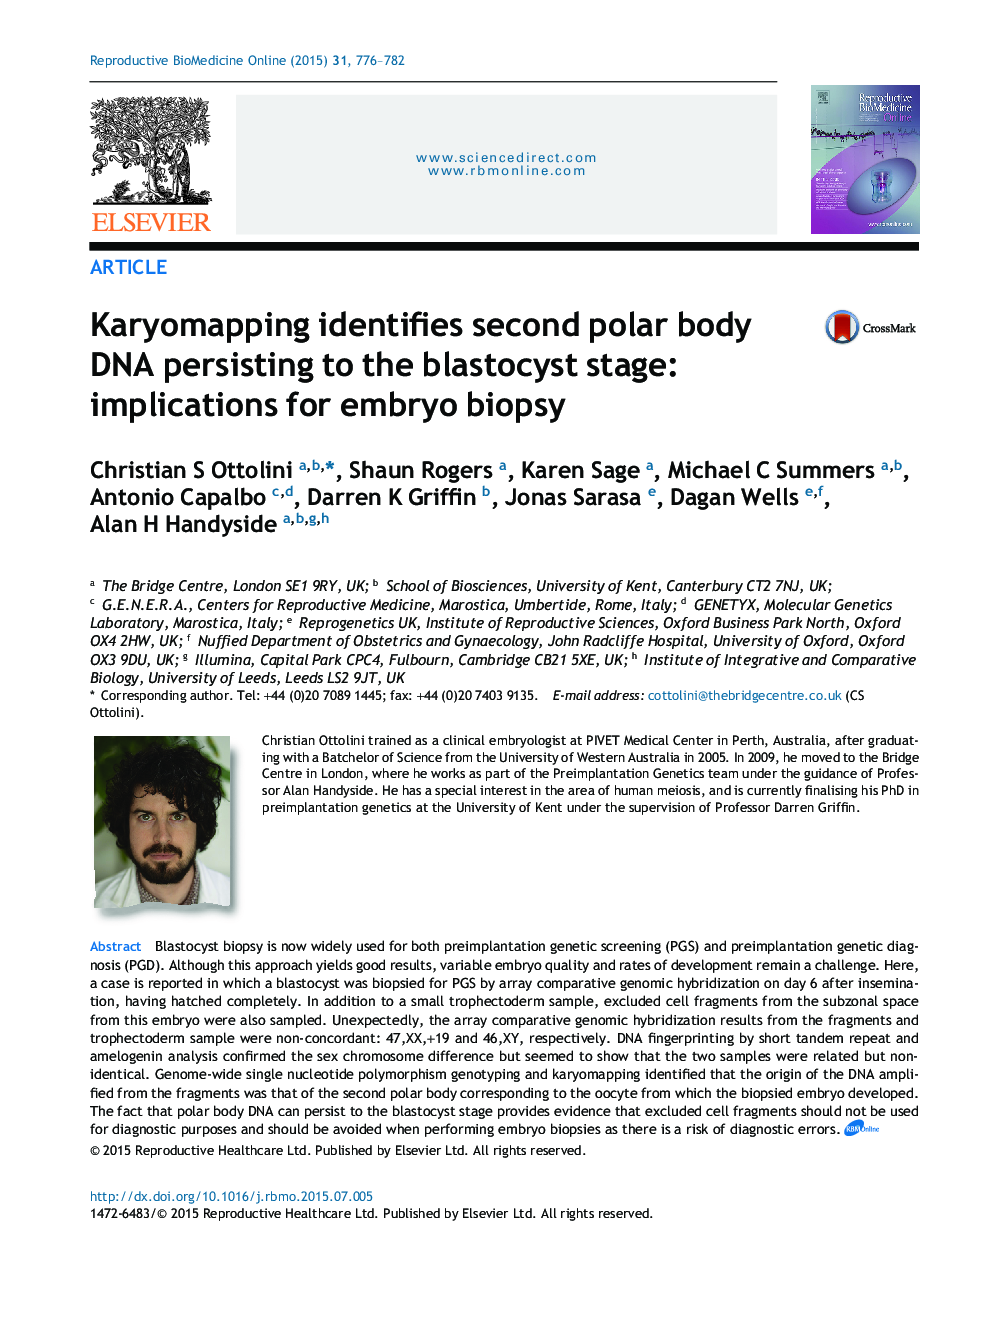 Karyomapping identifies second polar body DNA persisting to the blastocyst stage: implications for embryo biopsy